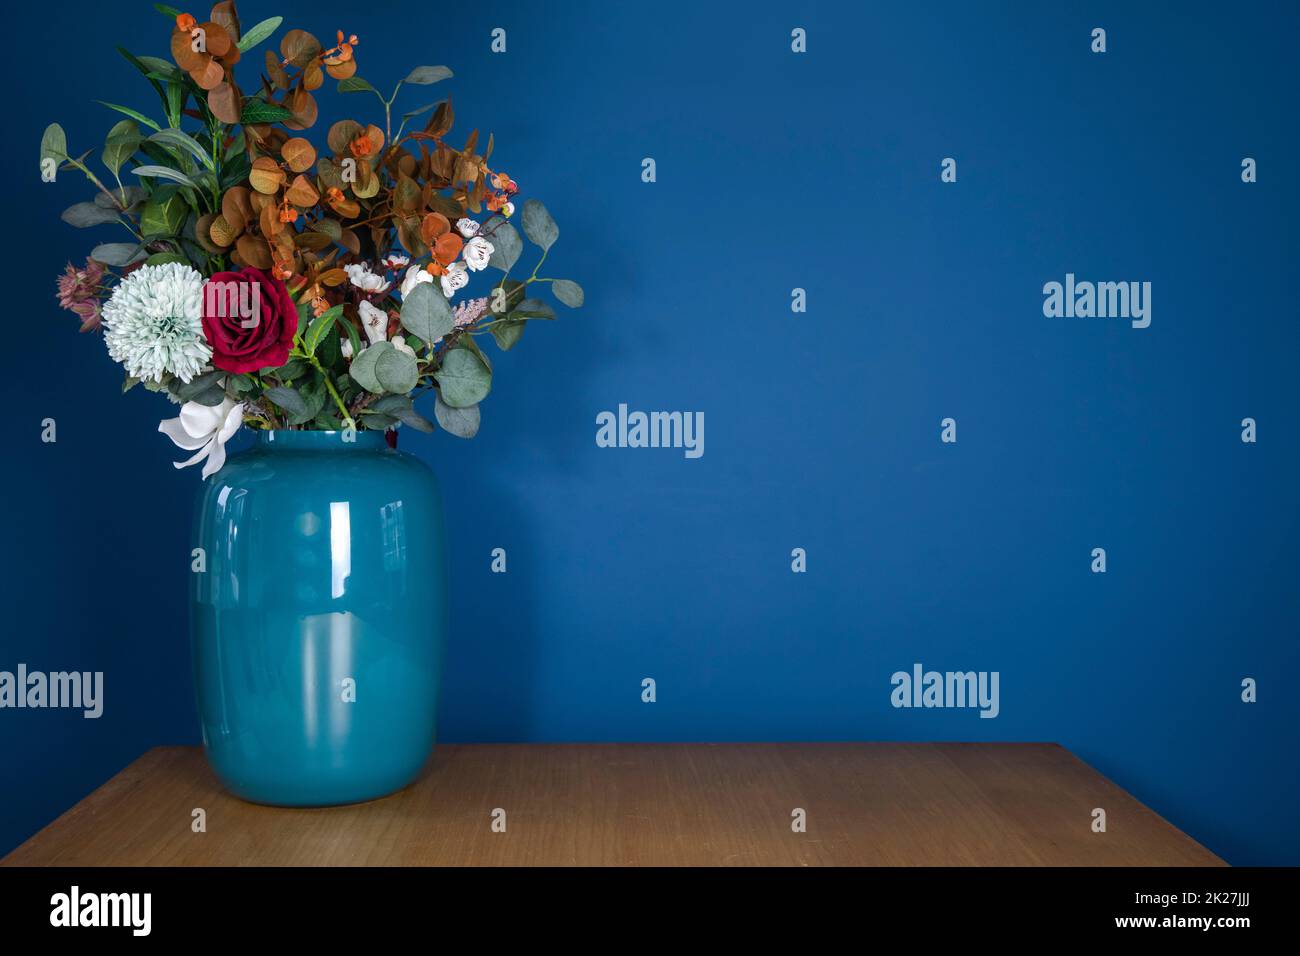 Blue vase on wooden table with plastic fake flower bouquet near blue wall, modern stylish decoration in living room with copy space. Home decoration concept Stock Photo